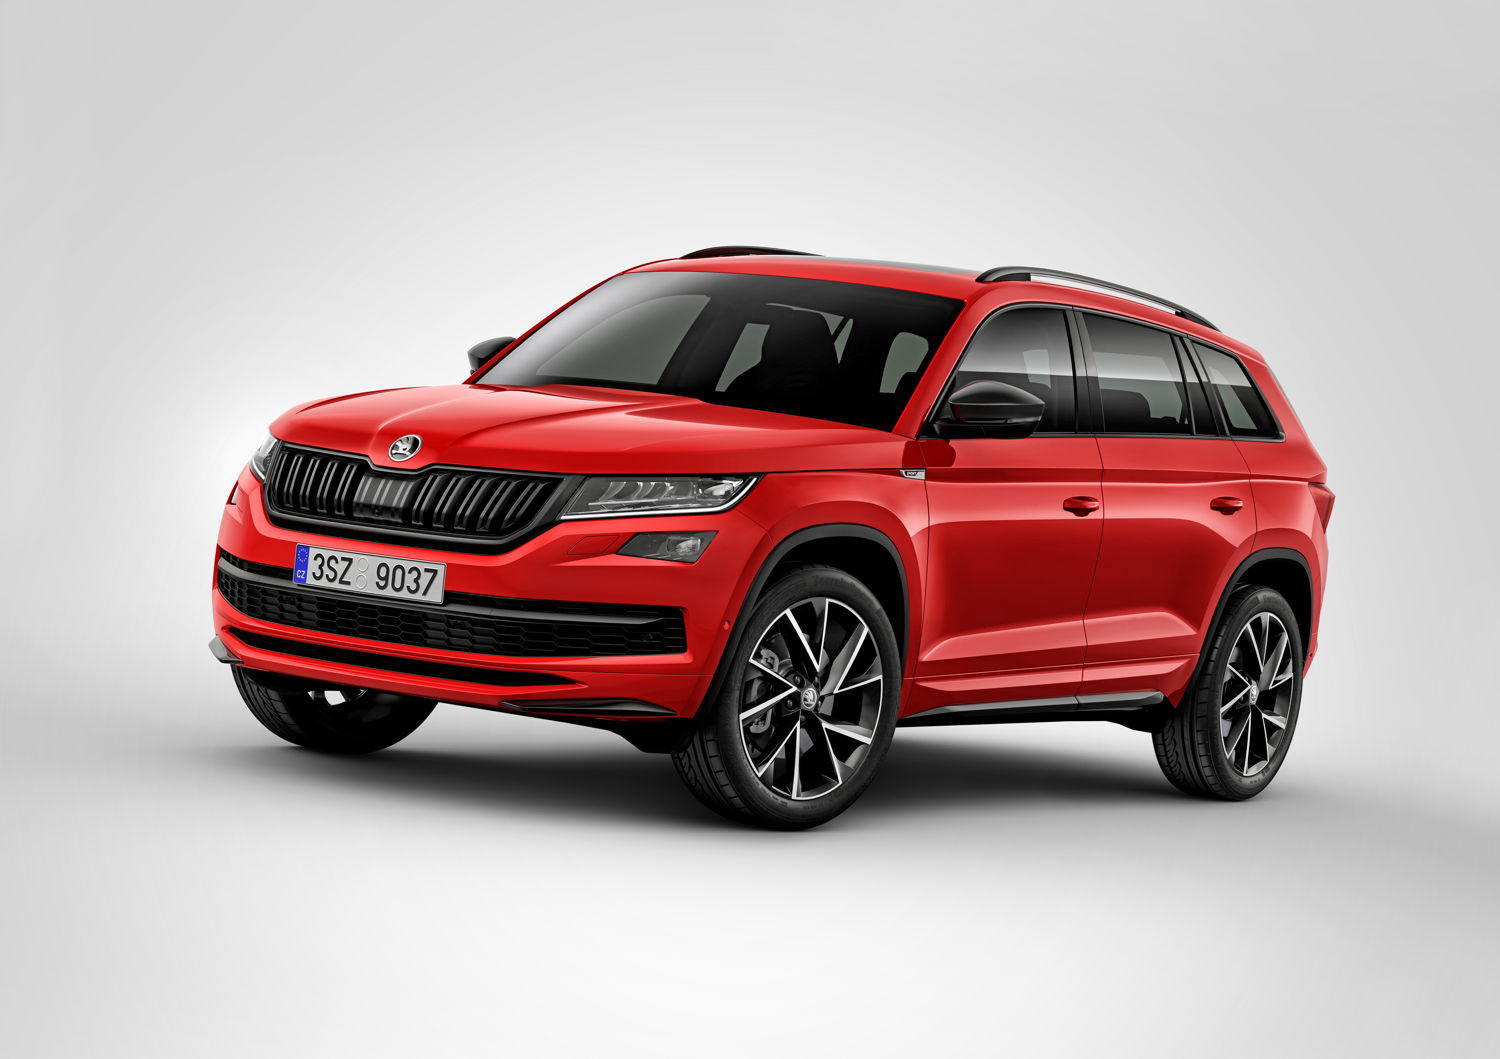 The ŠKODA KODIAQ SPORTLINE will be presented for the first time at the 2017 Geneva International Motor Show.